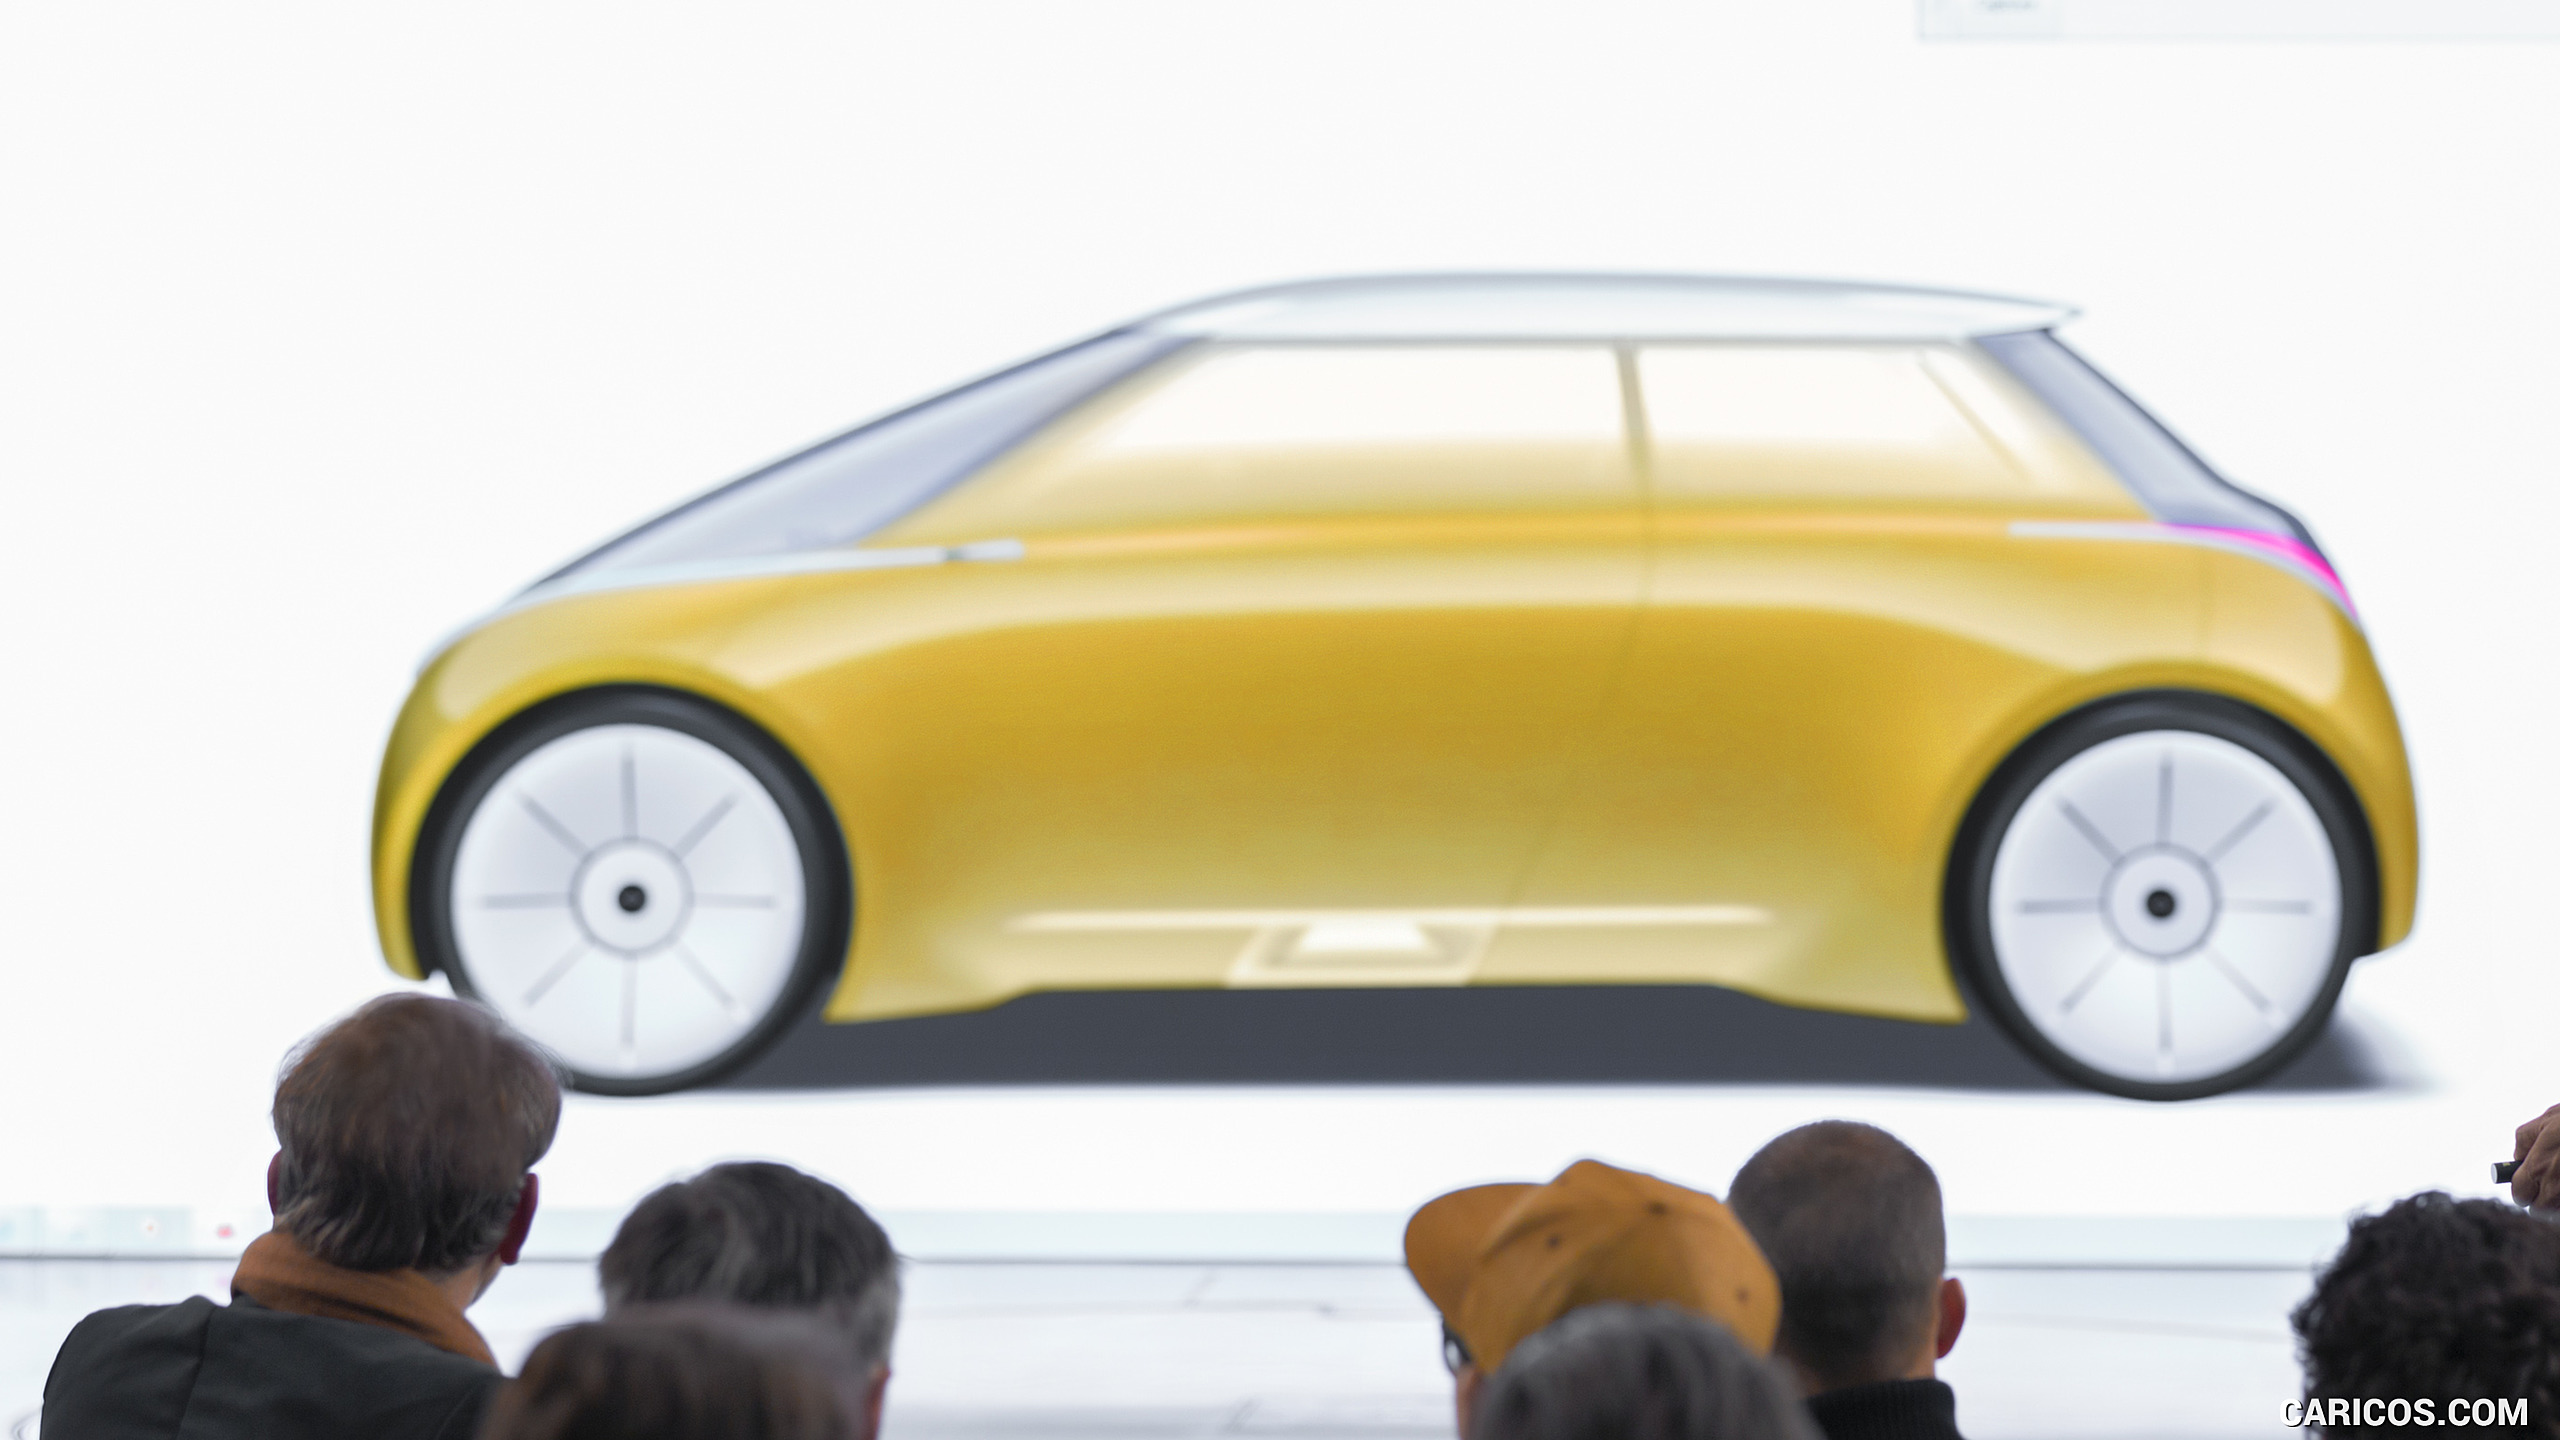 2016 MINI VISION NEXT 100 Concept - Making Of, #27 of 43